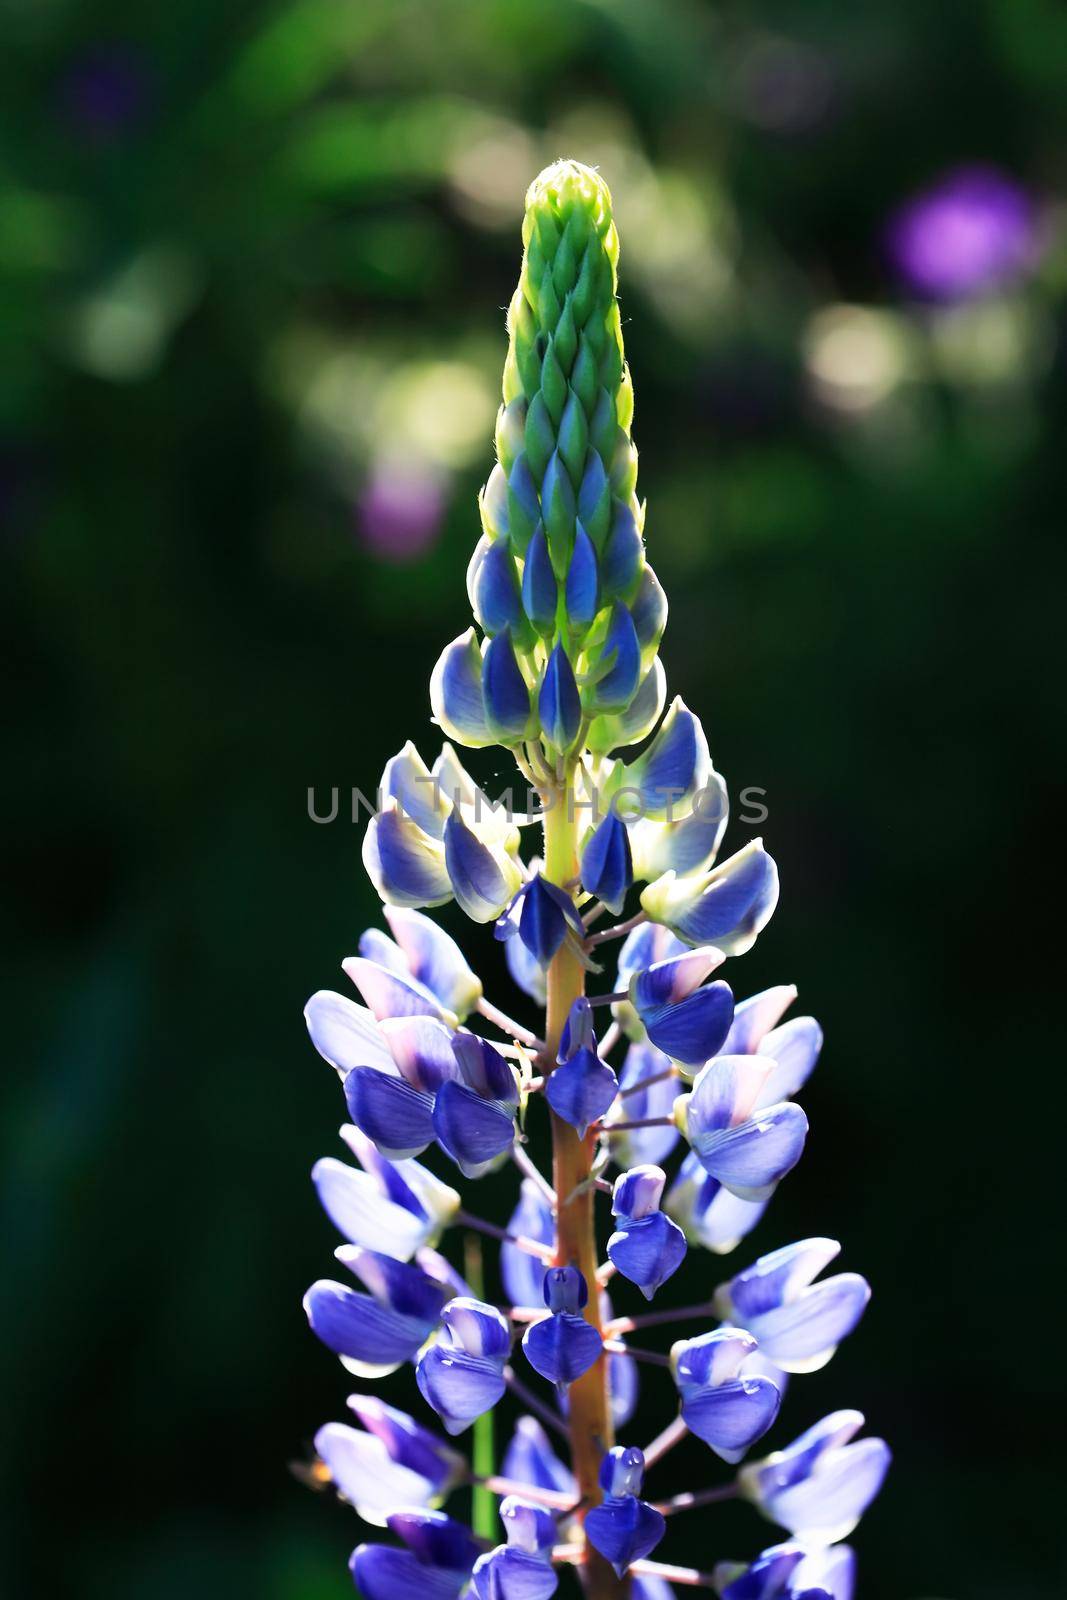 Closeup of very nice freshness blue lupine flower against green grass background